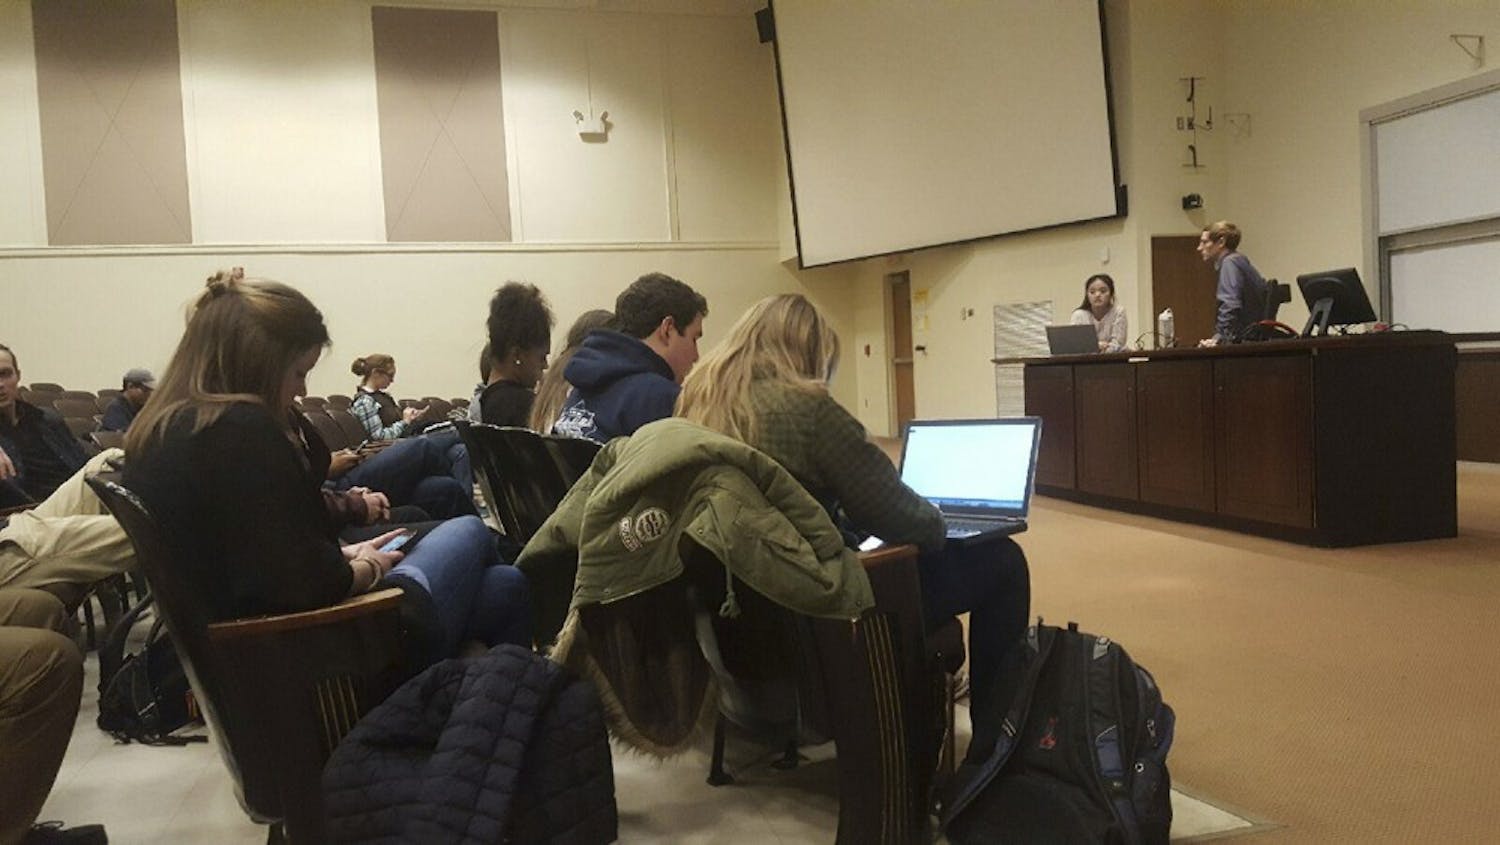 A meeting was held in Carroll Hall on Jan. 30 for students to announce their intent to run for student body president.